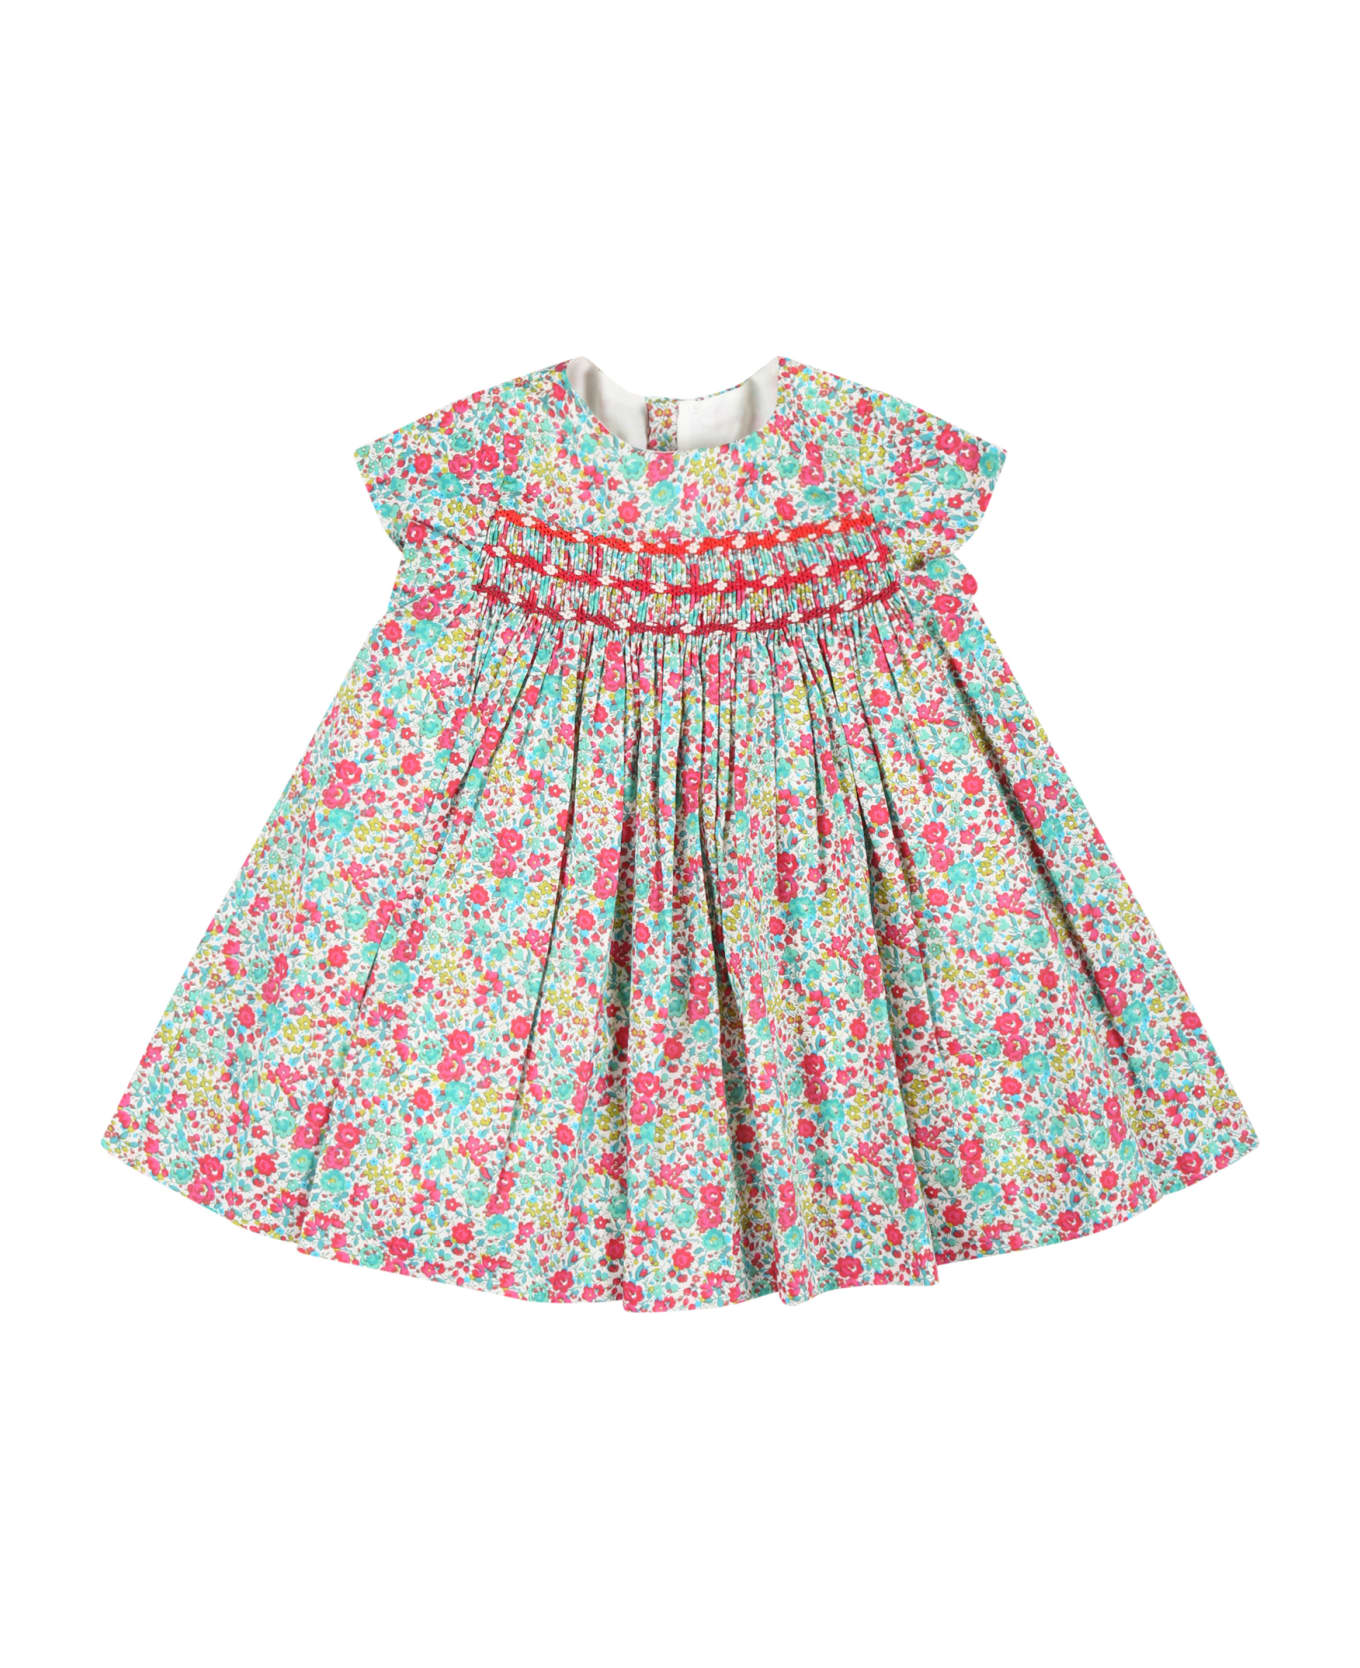 Bonpoint Multicolor Dress For Baby Girl With Liberty Print - Multicolor